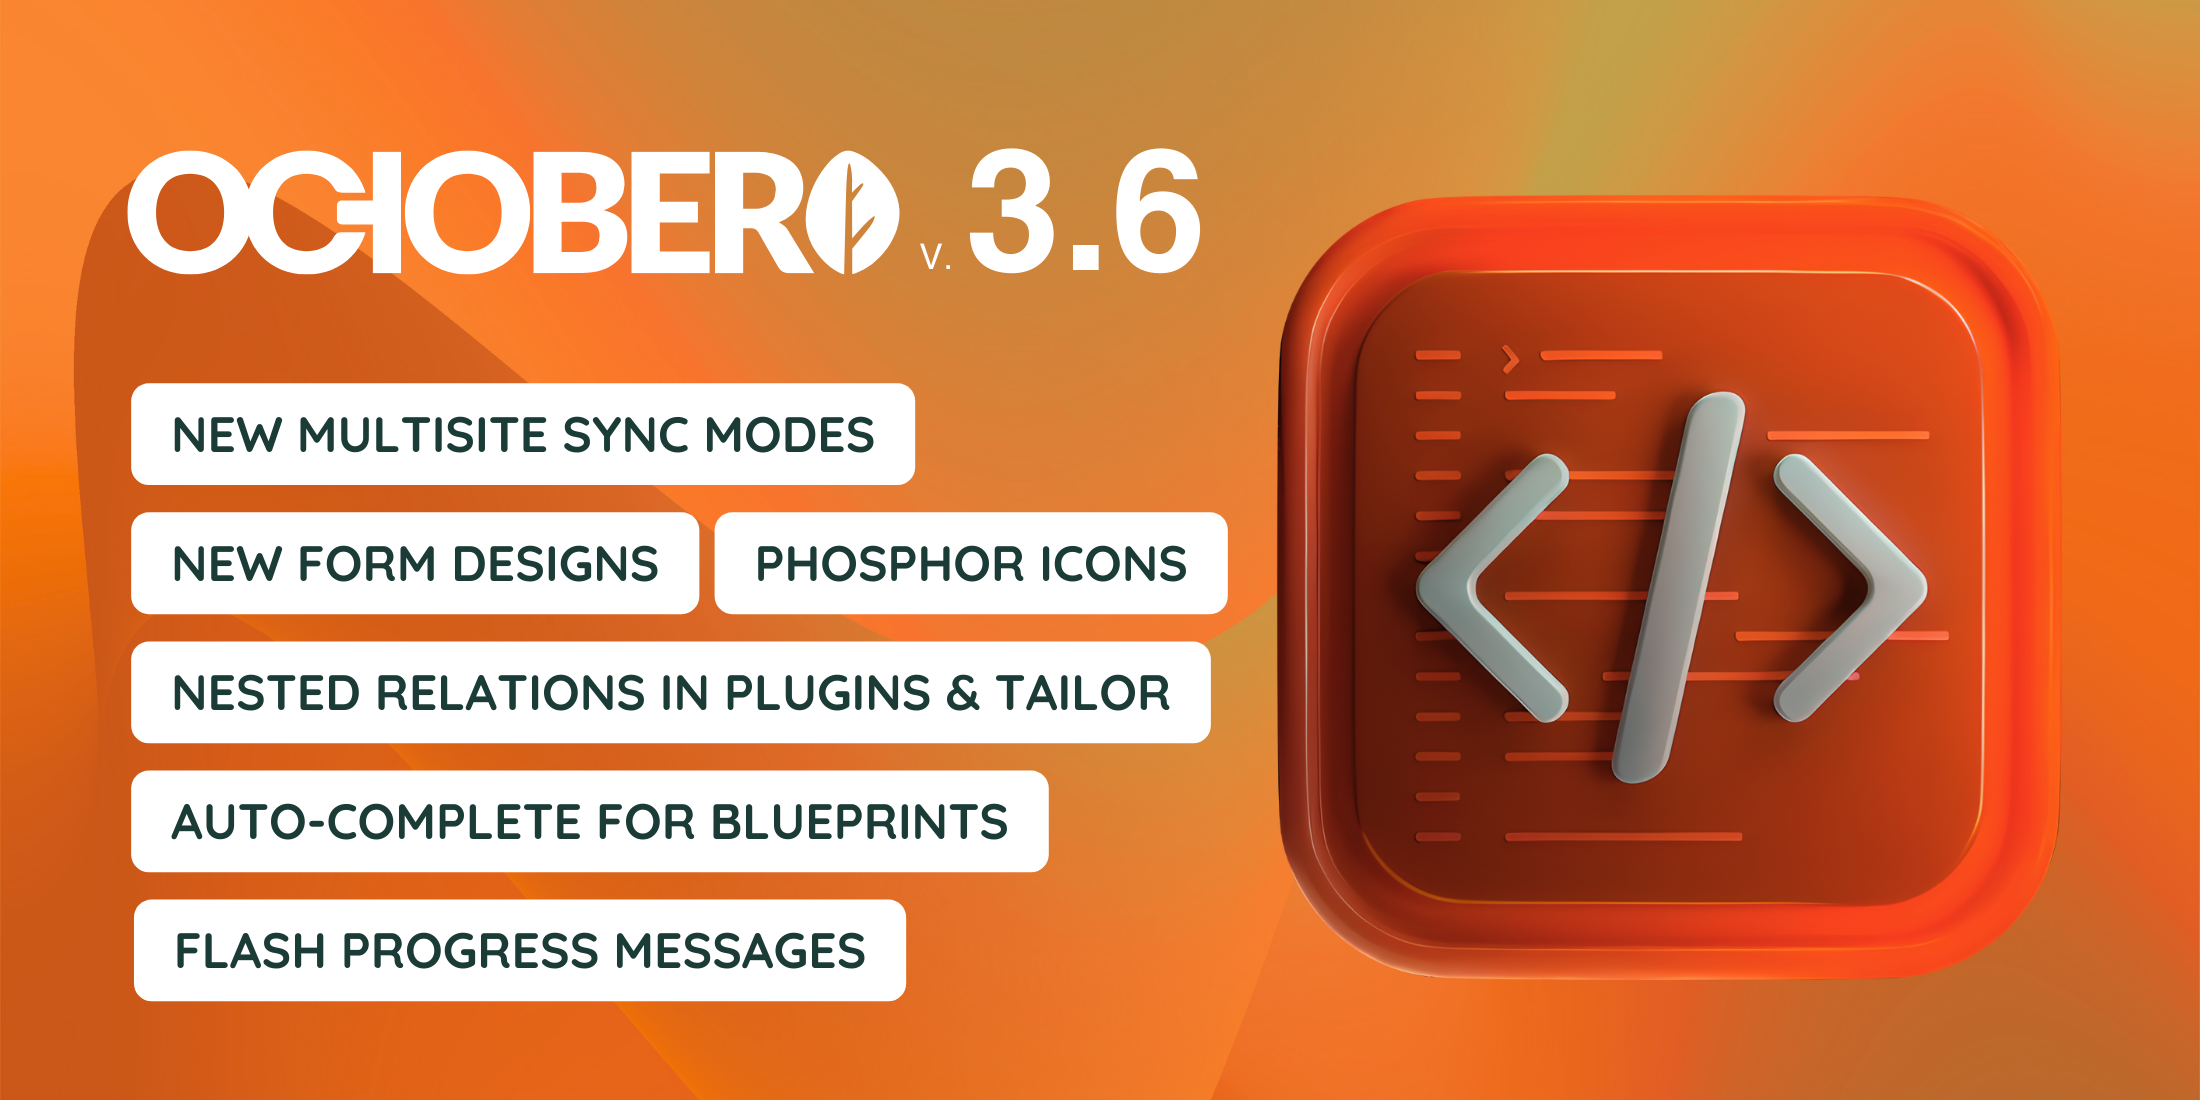 October CMS v3.6 Ships Today, Full of New Features image